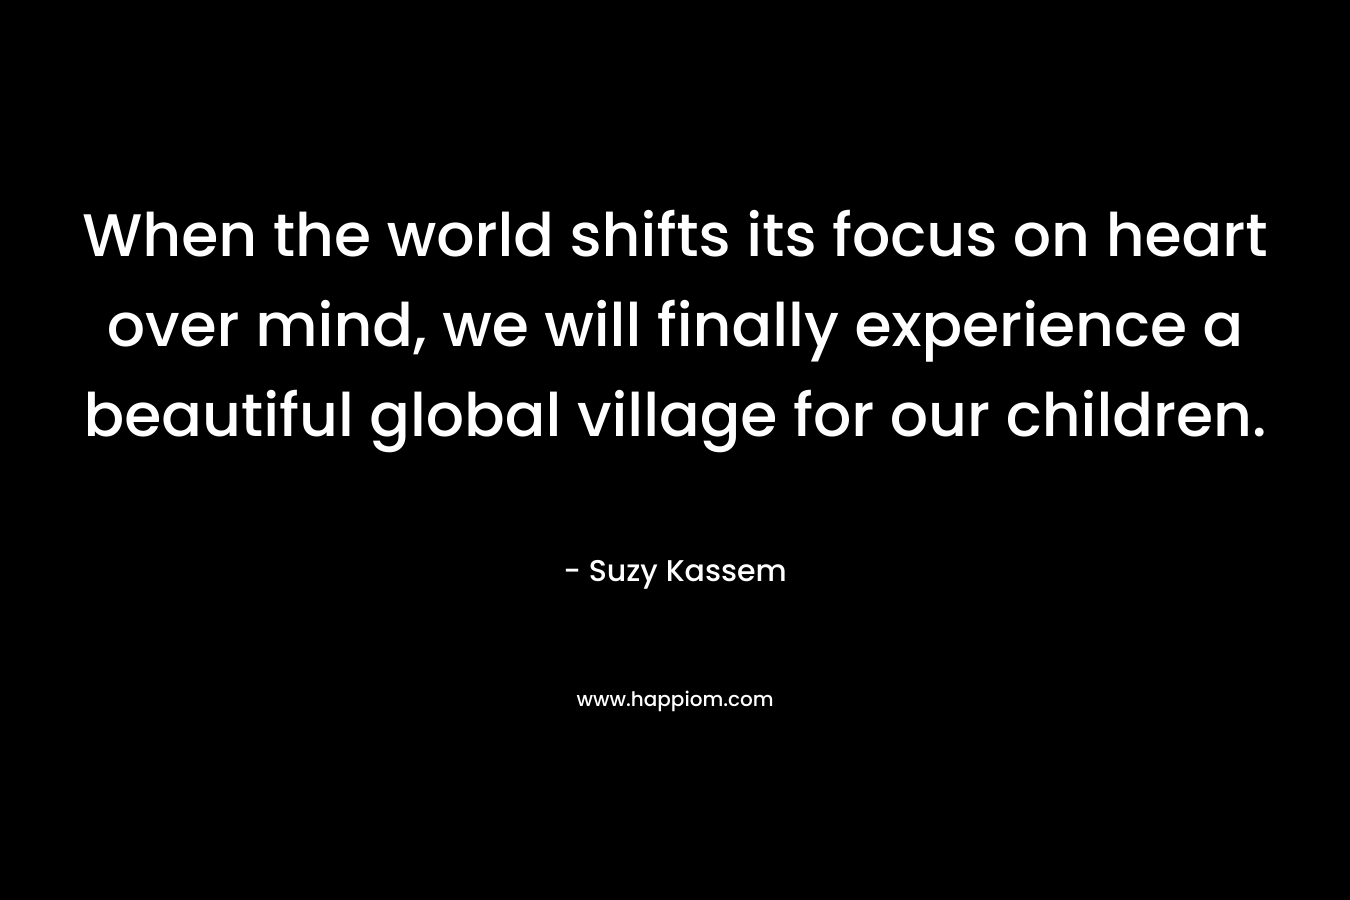 When the world shifts its focus on heart over mind, we will finally experience a beautiful global village for our children.